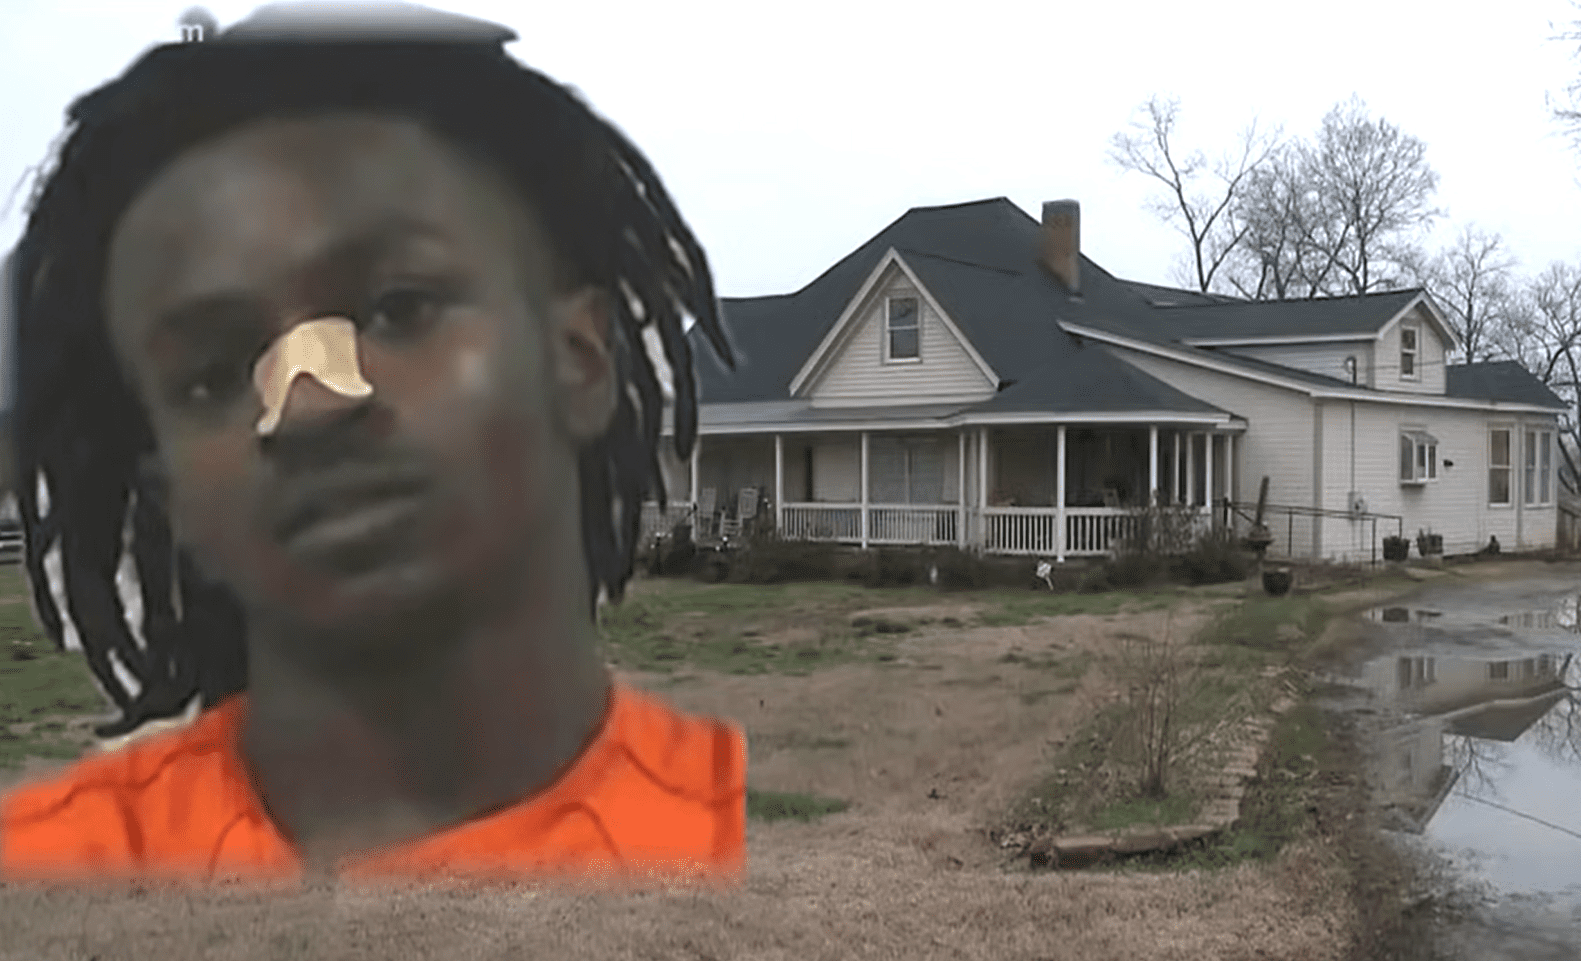 A picture of the house intruder overlaid onto a picture of Gwendolyn Agard’s house. │Source: youtube.com/11Alive